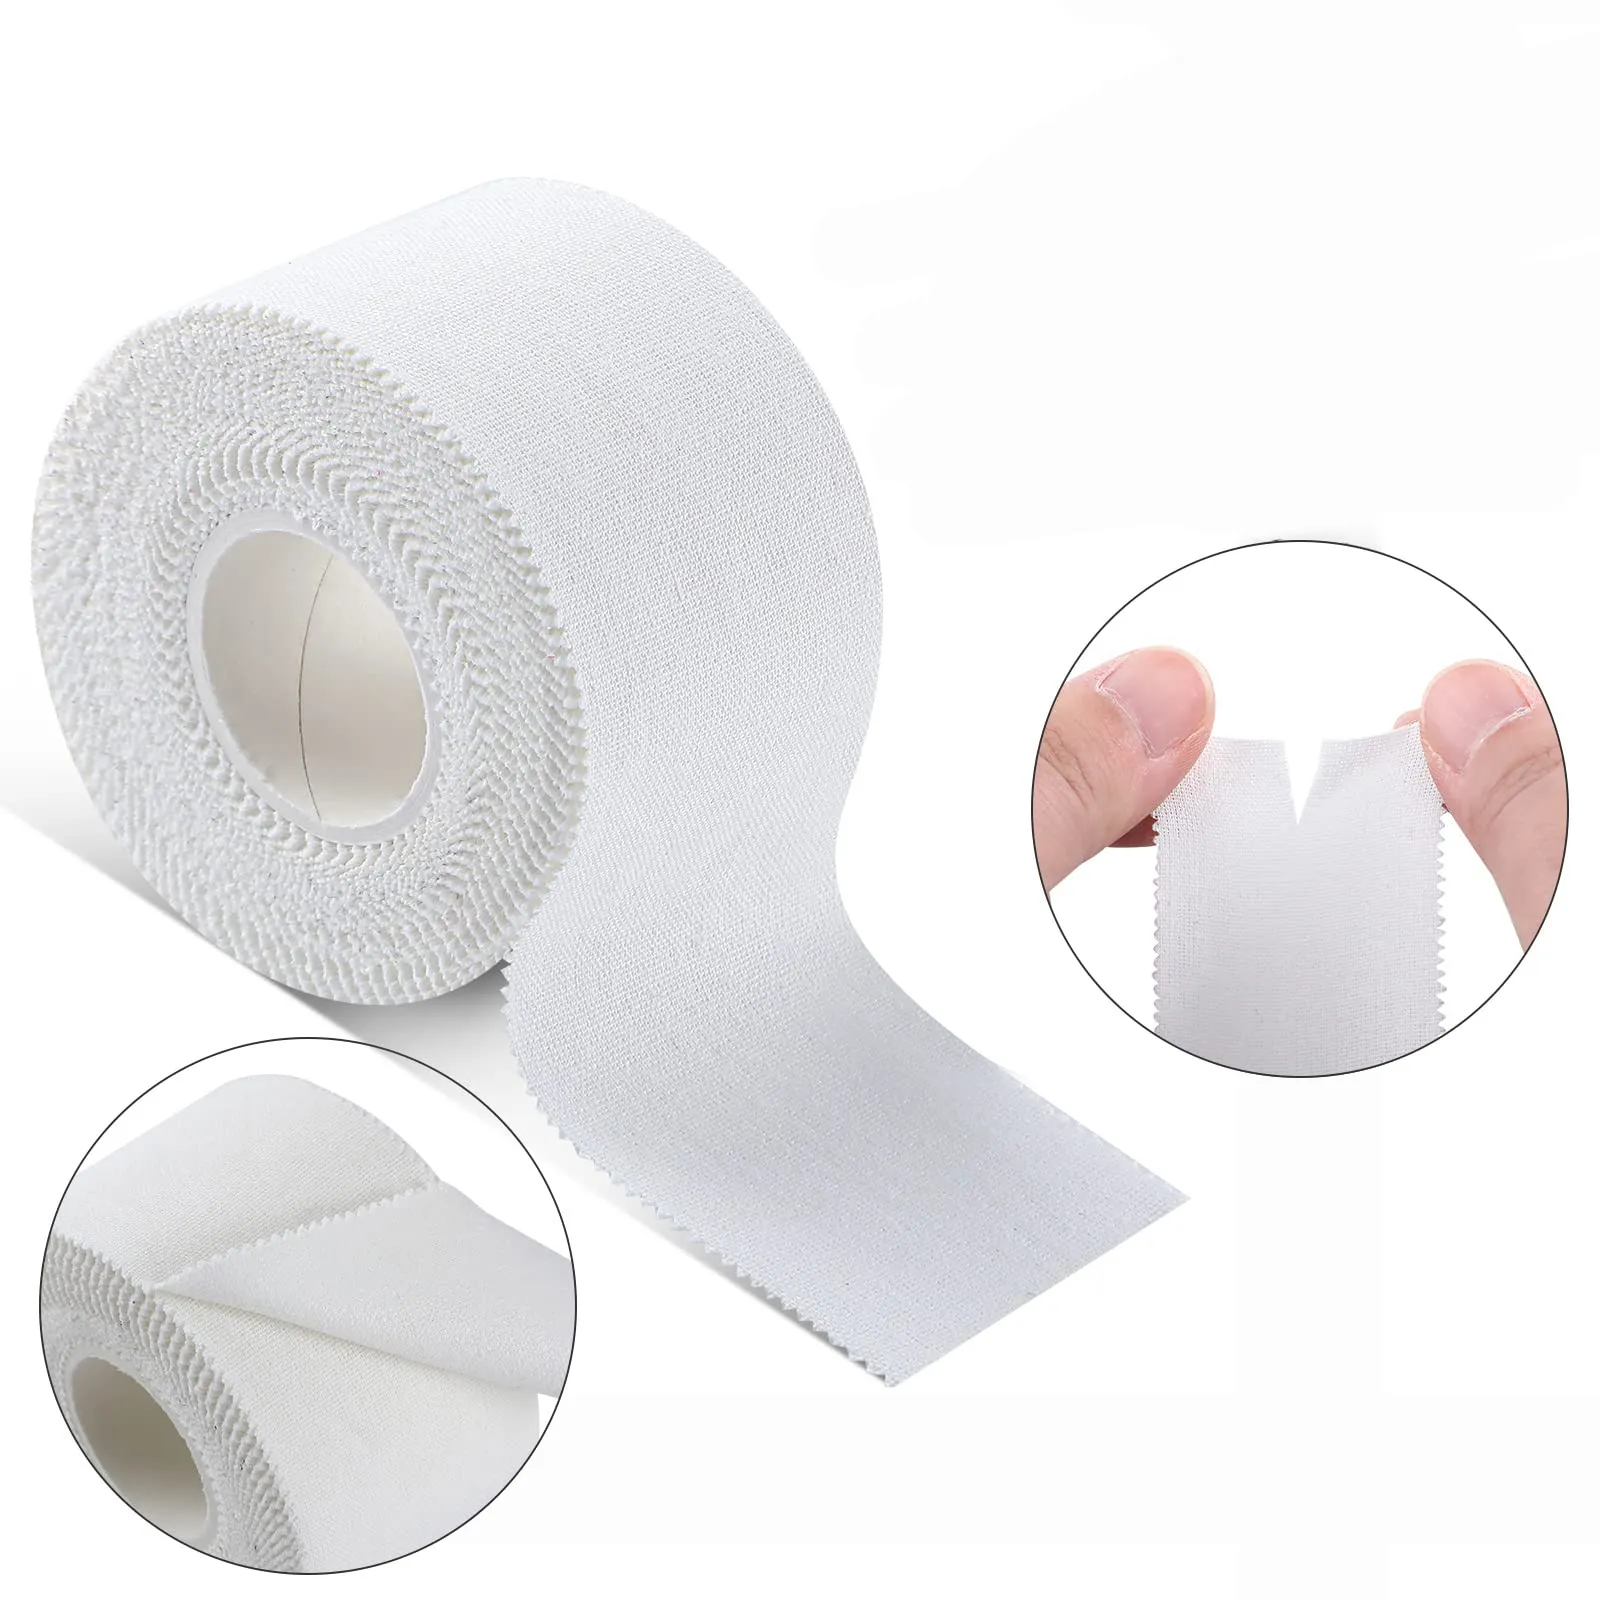 Custom Logo Cotton Rayon Zinc Oxide Bandage 5cm Athletic Tape with Foam Sports Wrap Protection for Sports Injuries